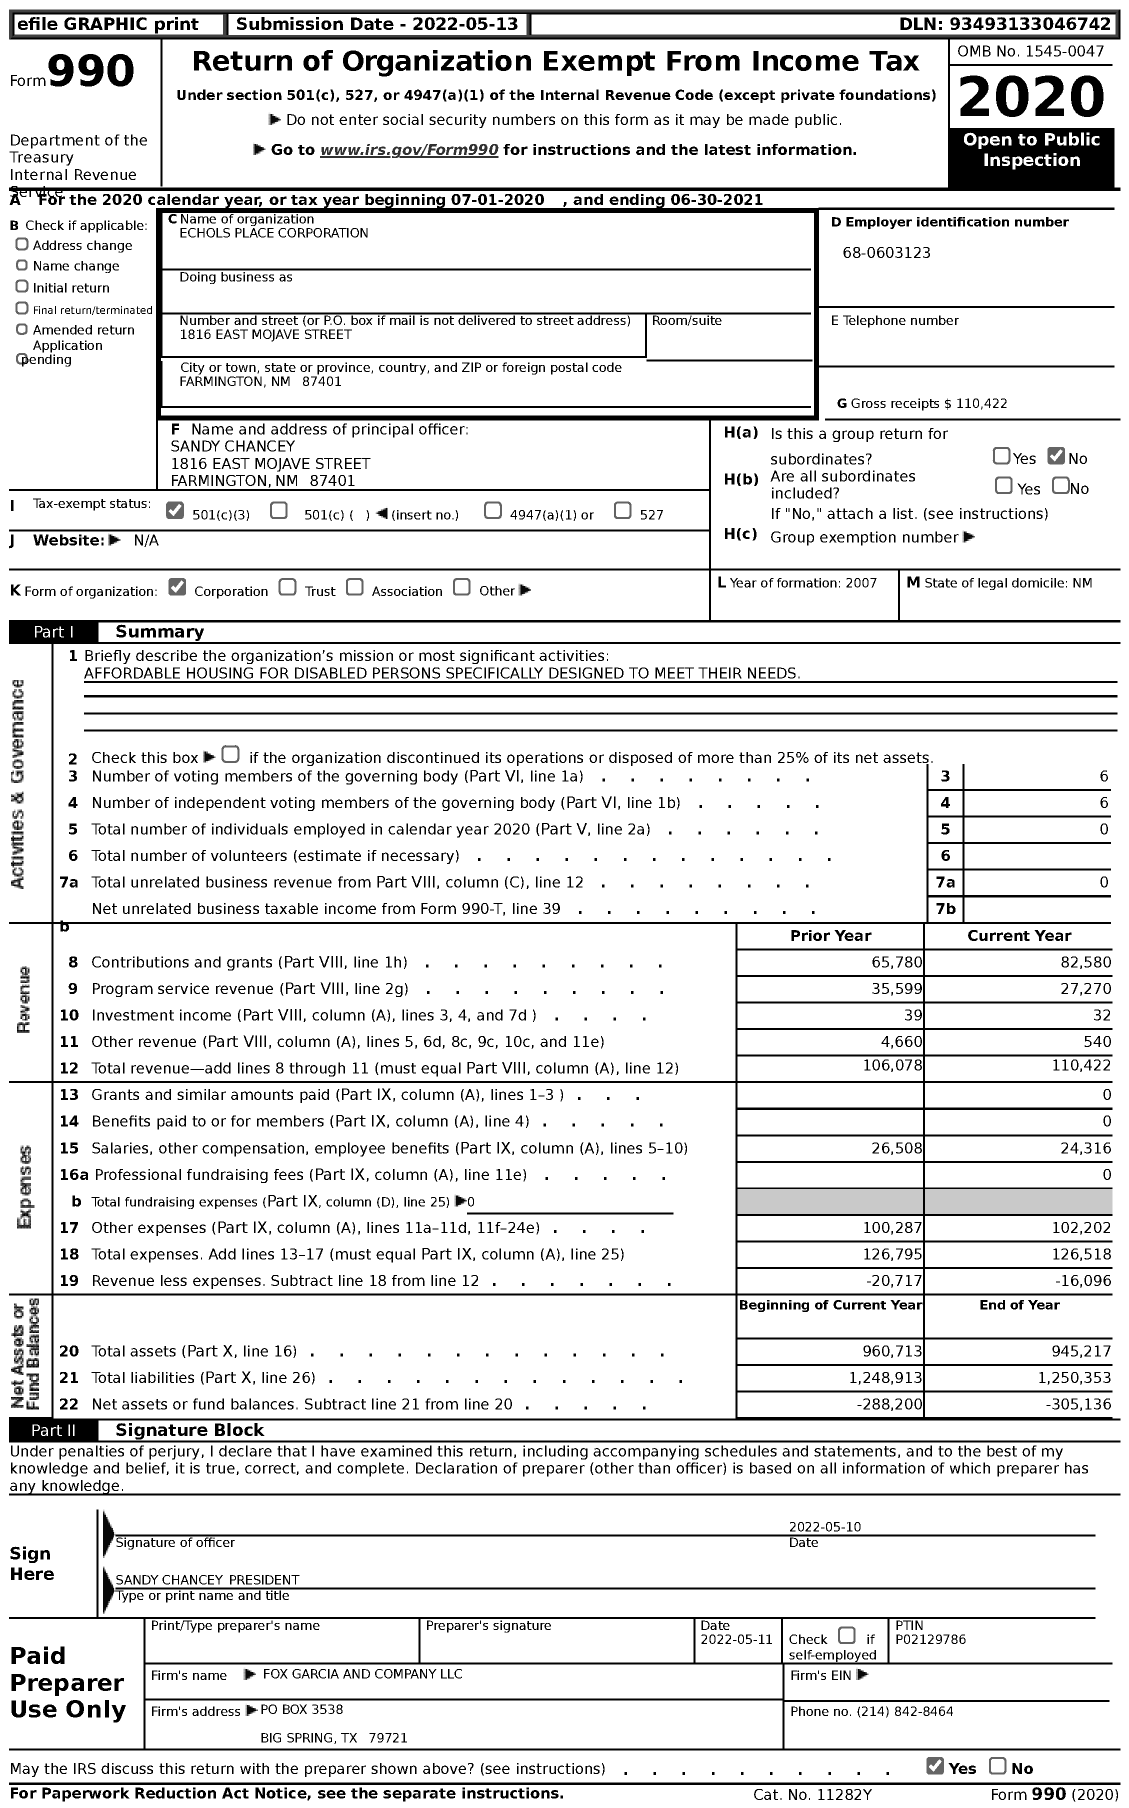 Image of first page of 2020 Form 990 for Echols Place Corporation